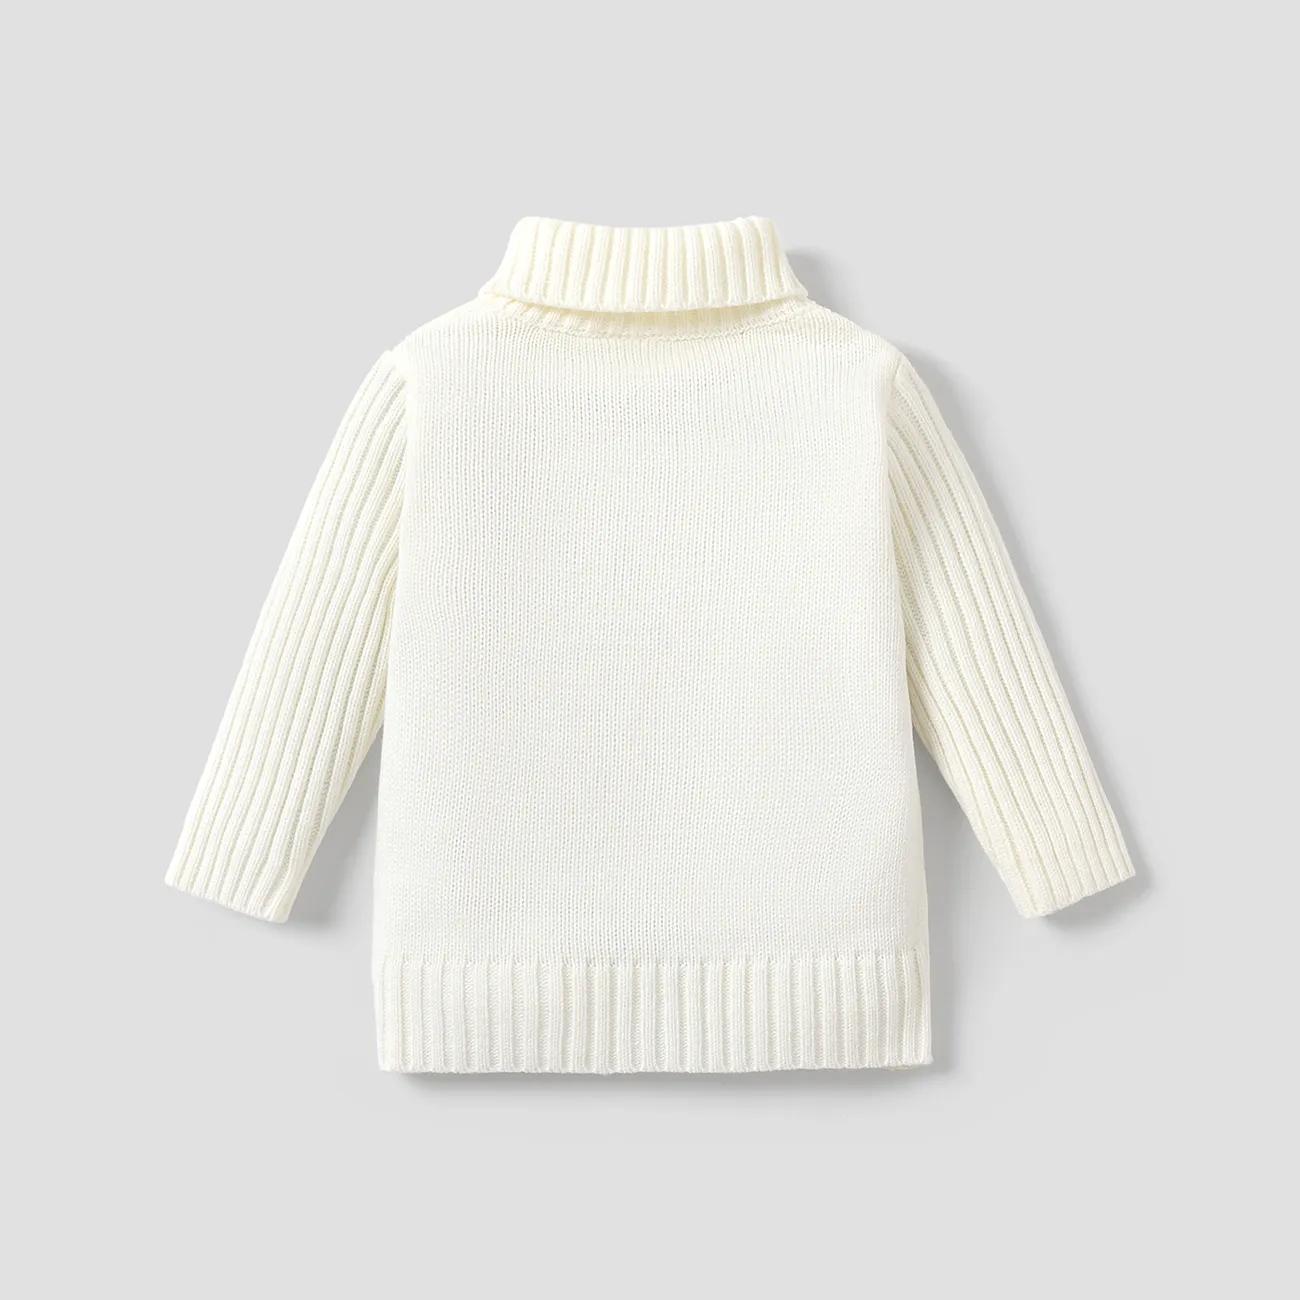 Baby Boy/Girl Casual Solid Color Long Sleeve Sweater White big image 1